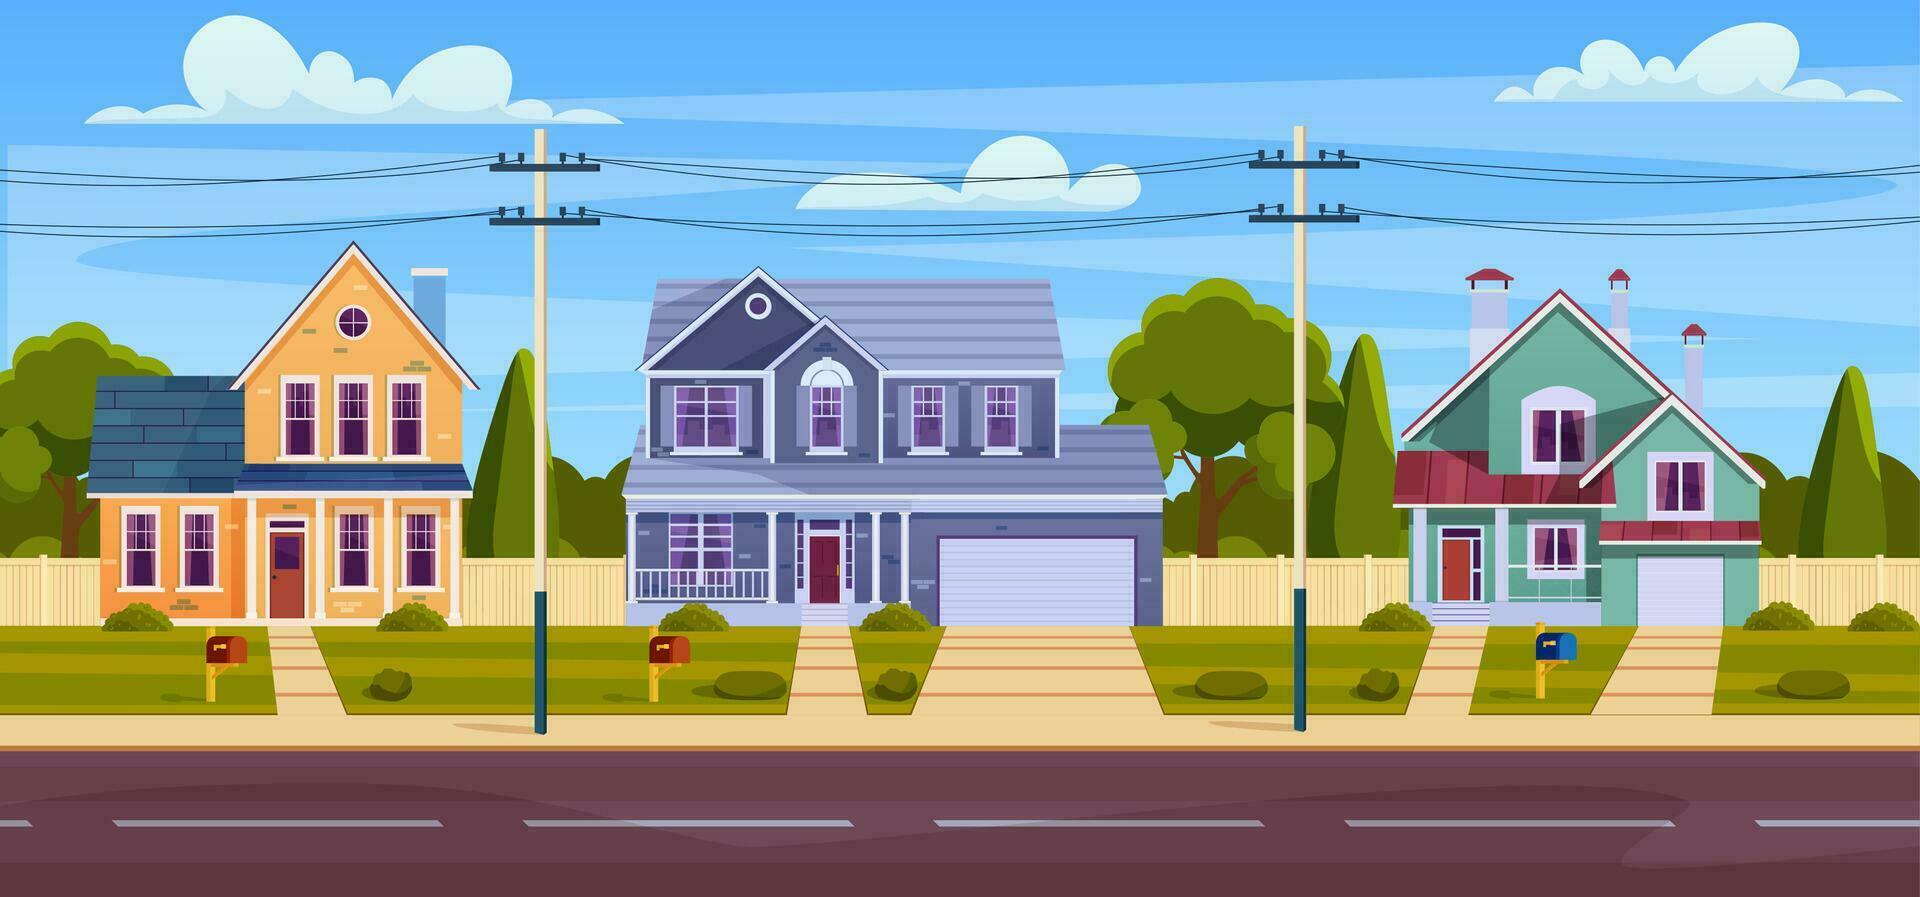 Rural cottages, suburban street with modern buildings with garages and green trees. Cottage Real Estates Cute Town Concept. Vector illustration in flat style